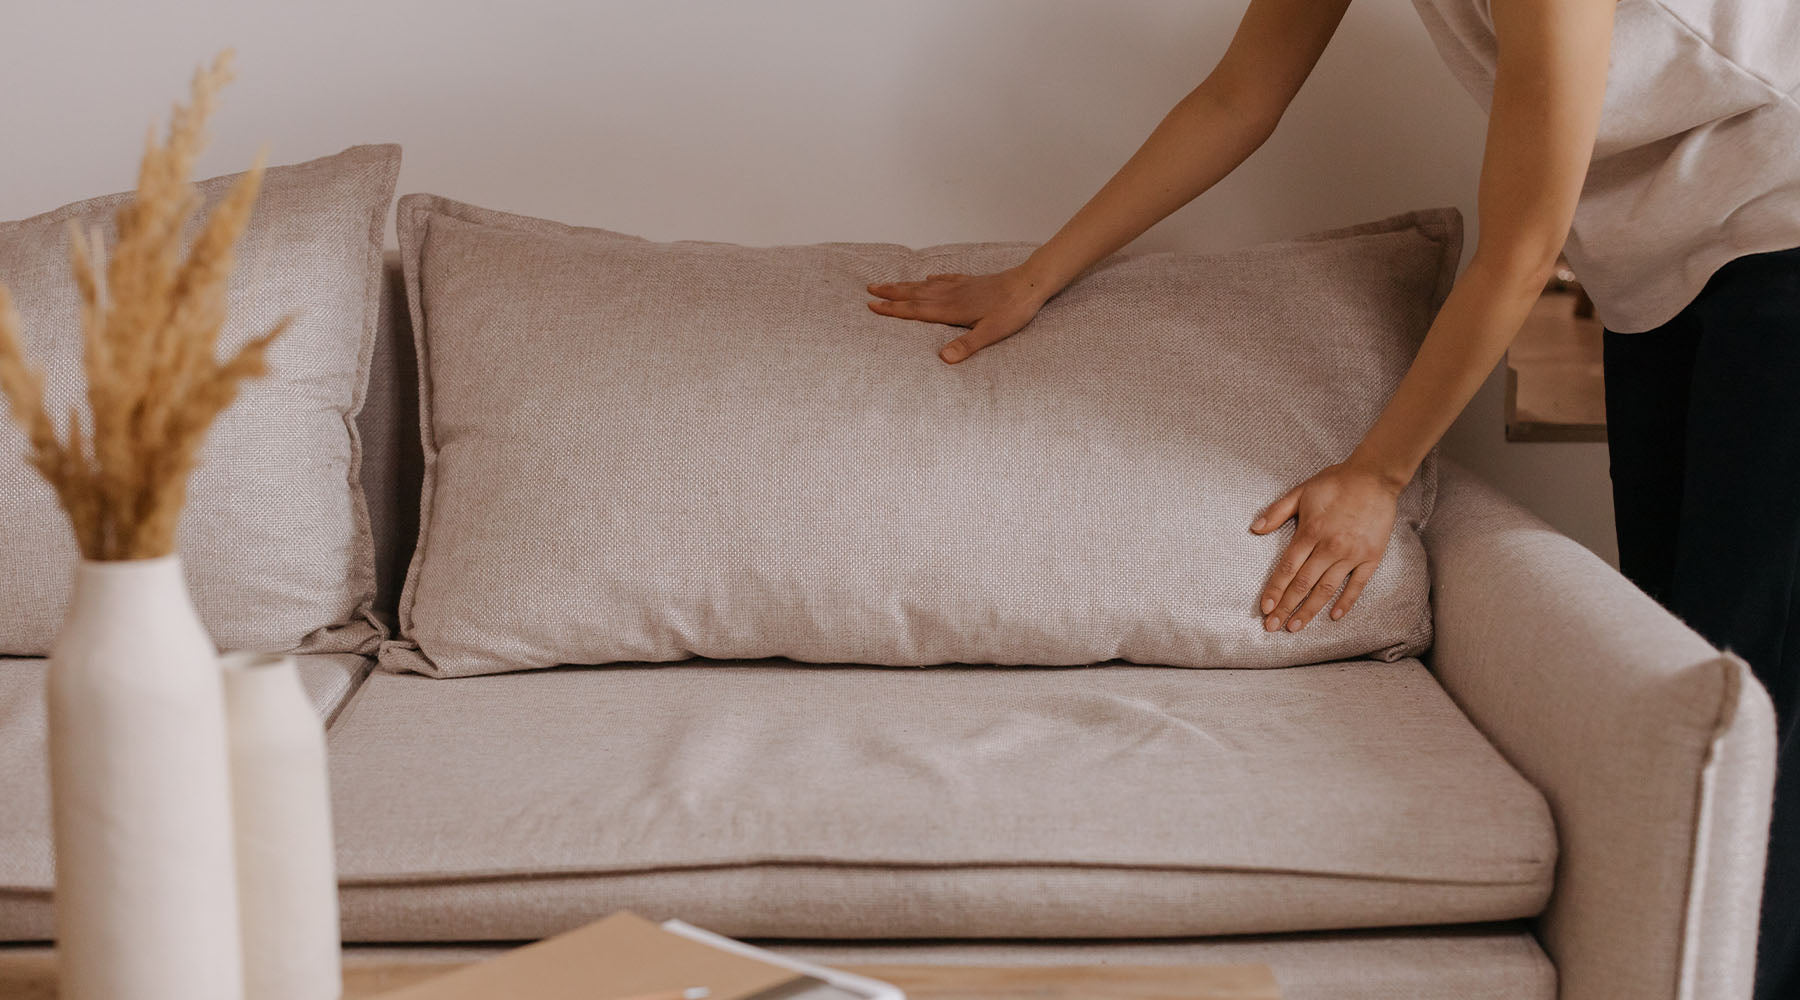 How To Fluff Couch Pillows